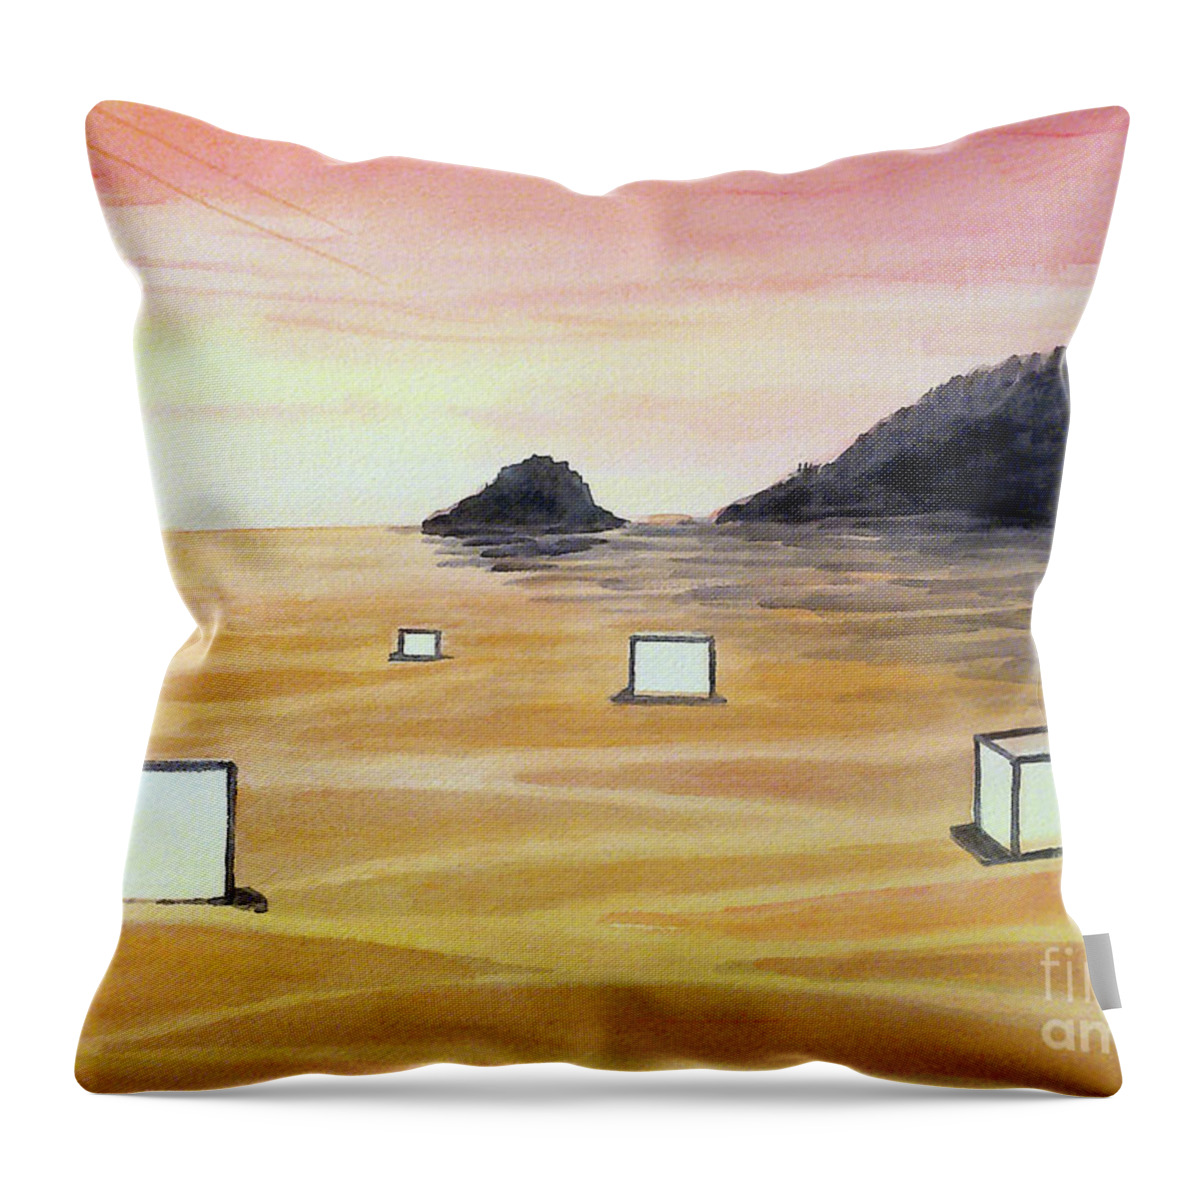 Lanterns Throw Pillow featuring the painting Floating Lanterns by Rohvannyn Shaw